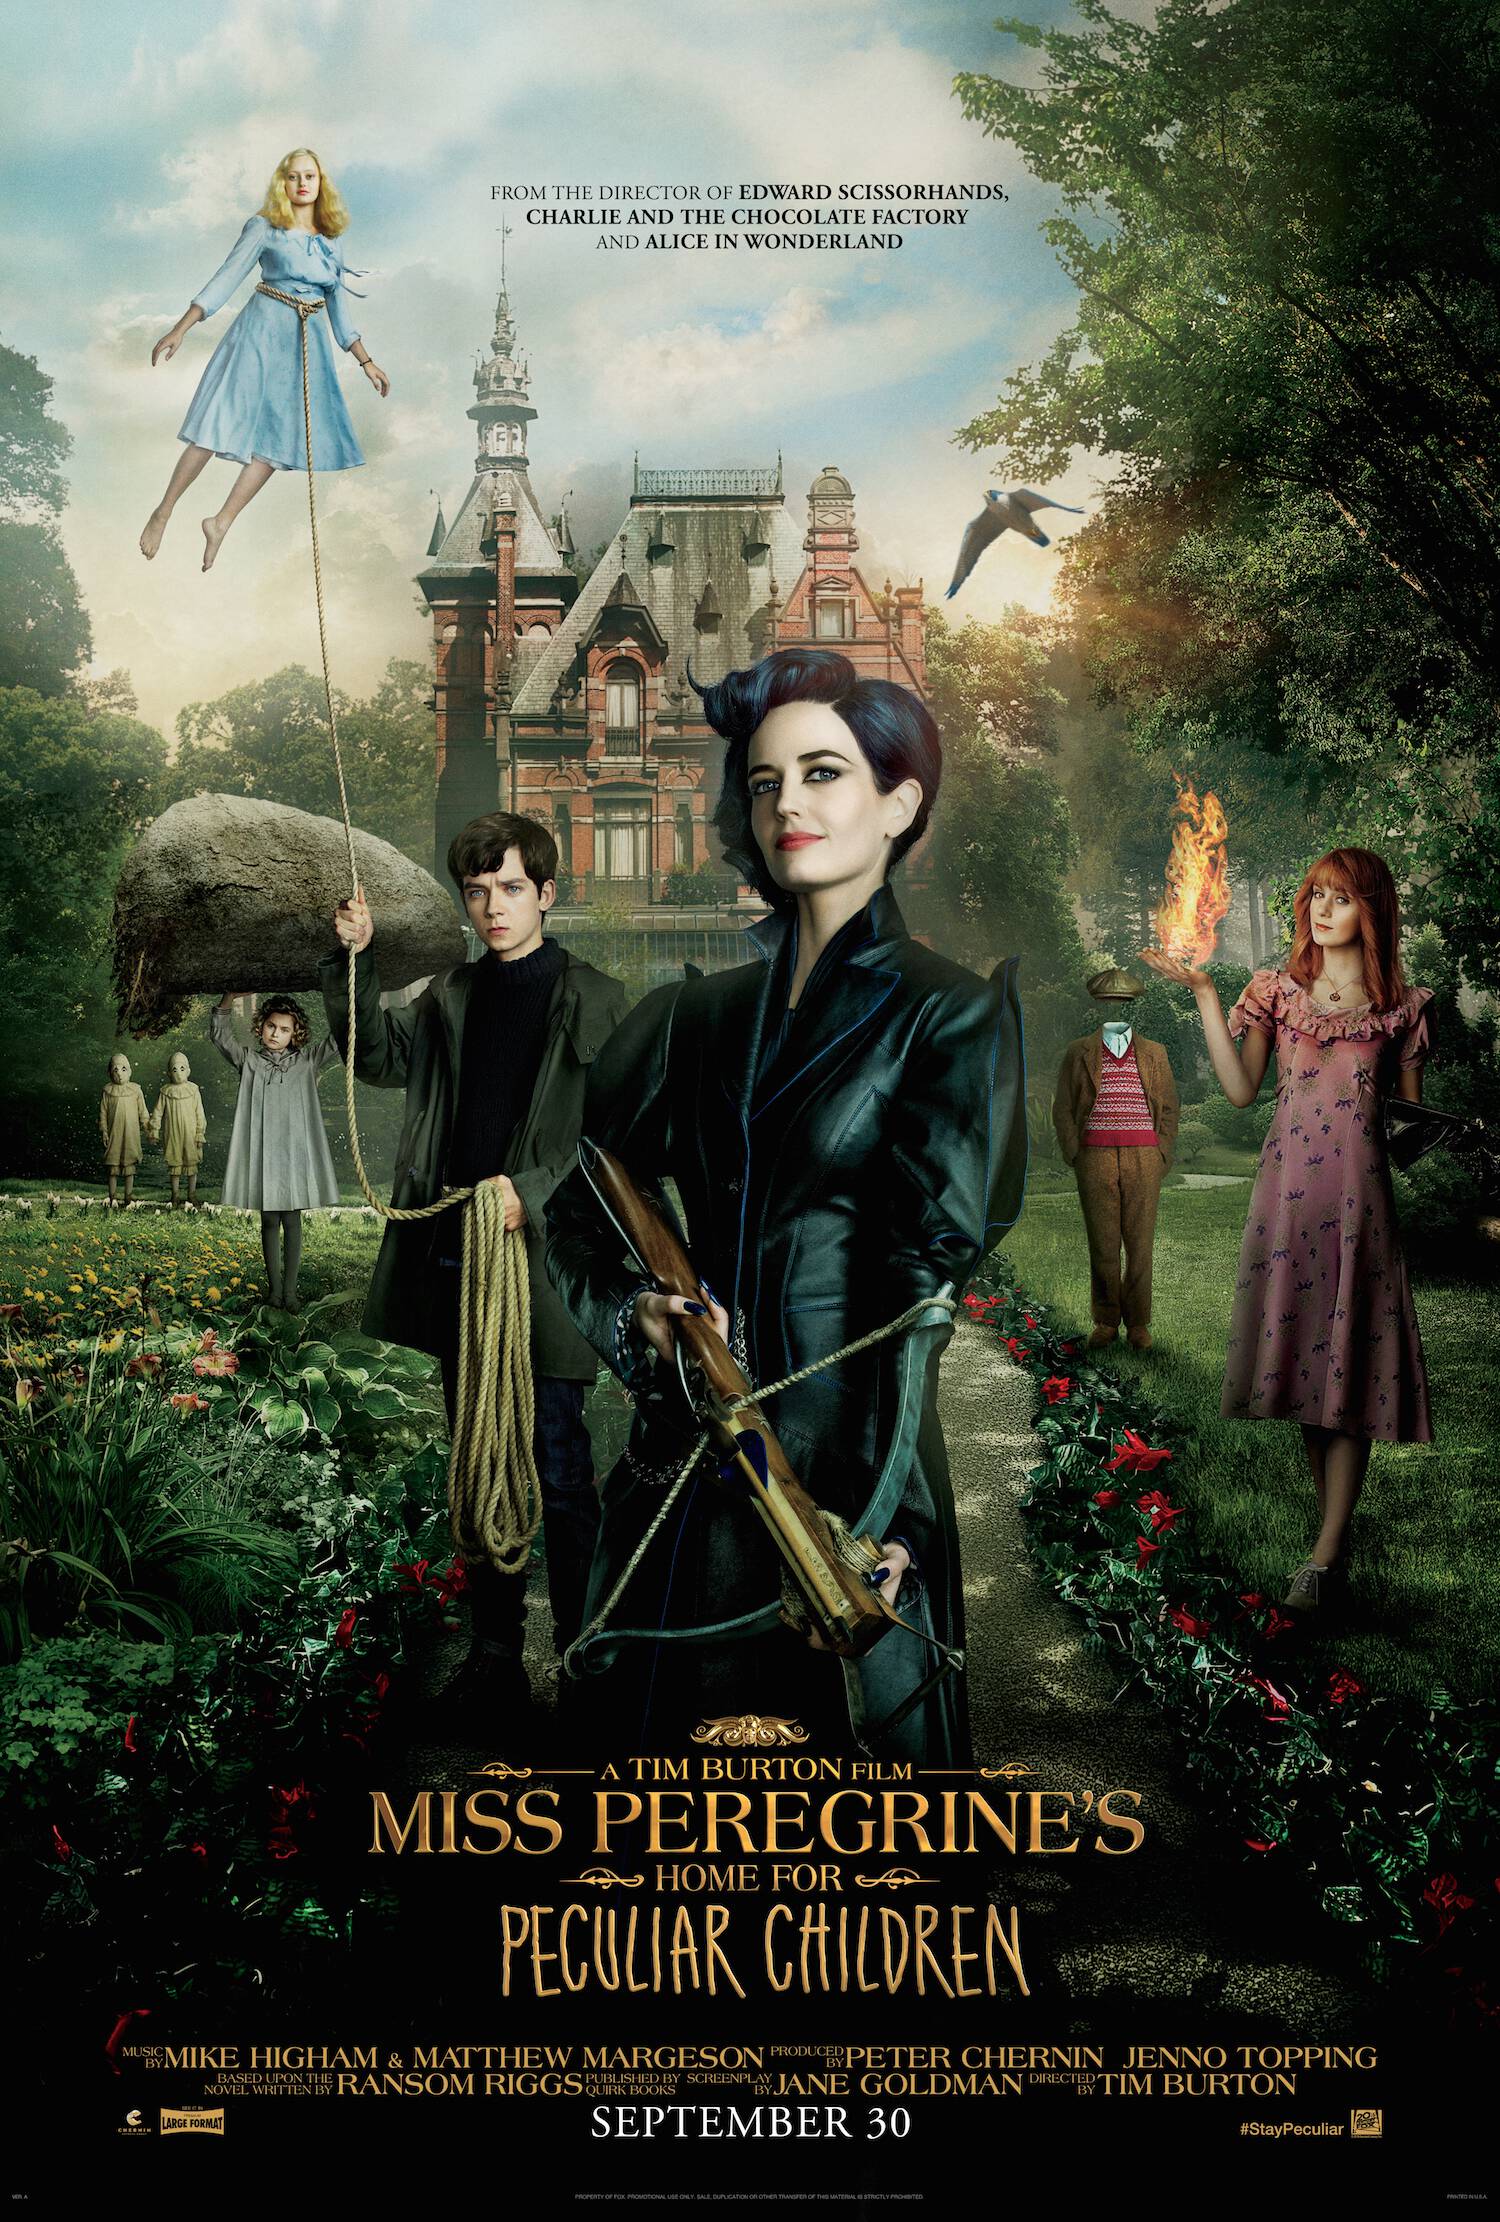 I'm so excited for this movie! Check out the new Miss Peregrine's Home for Peculiar Children trailer. The film hits theaters September 30!